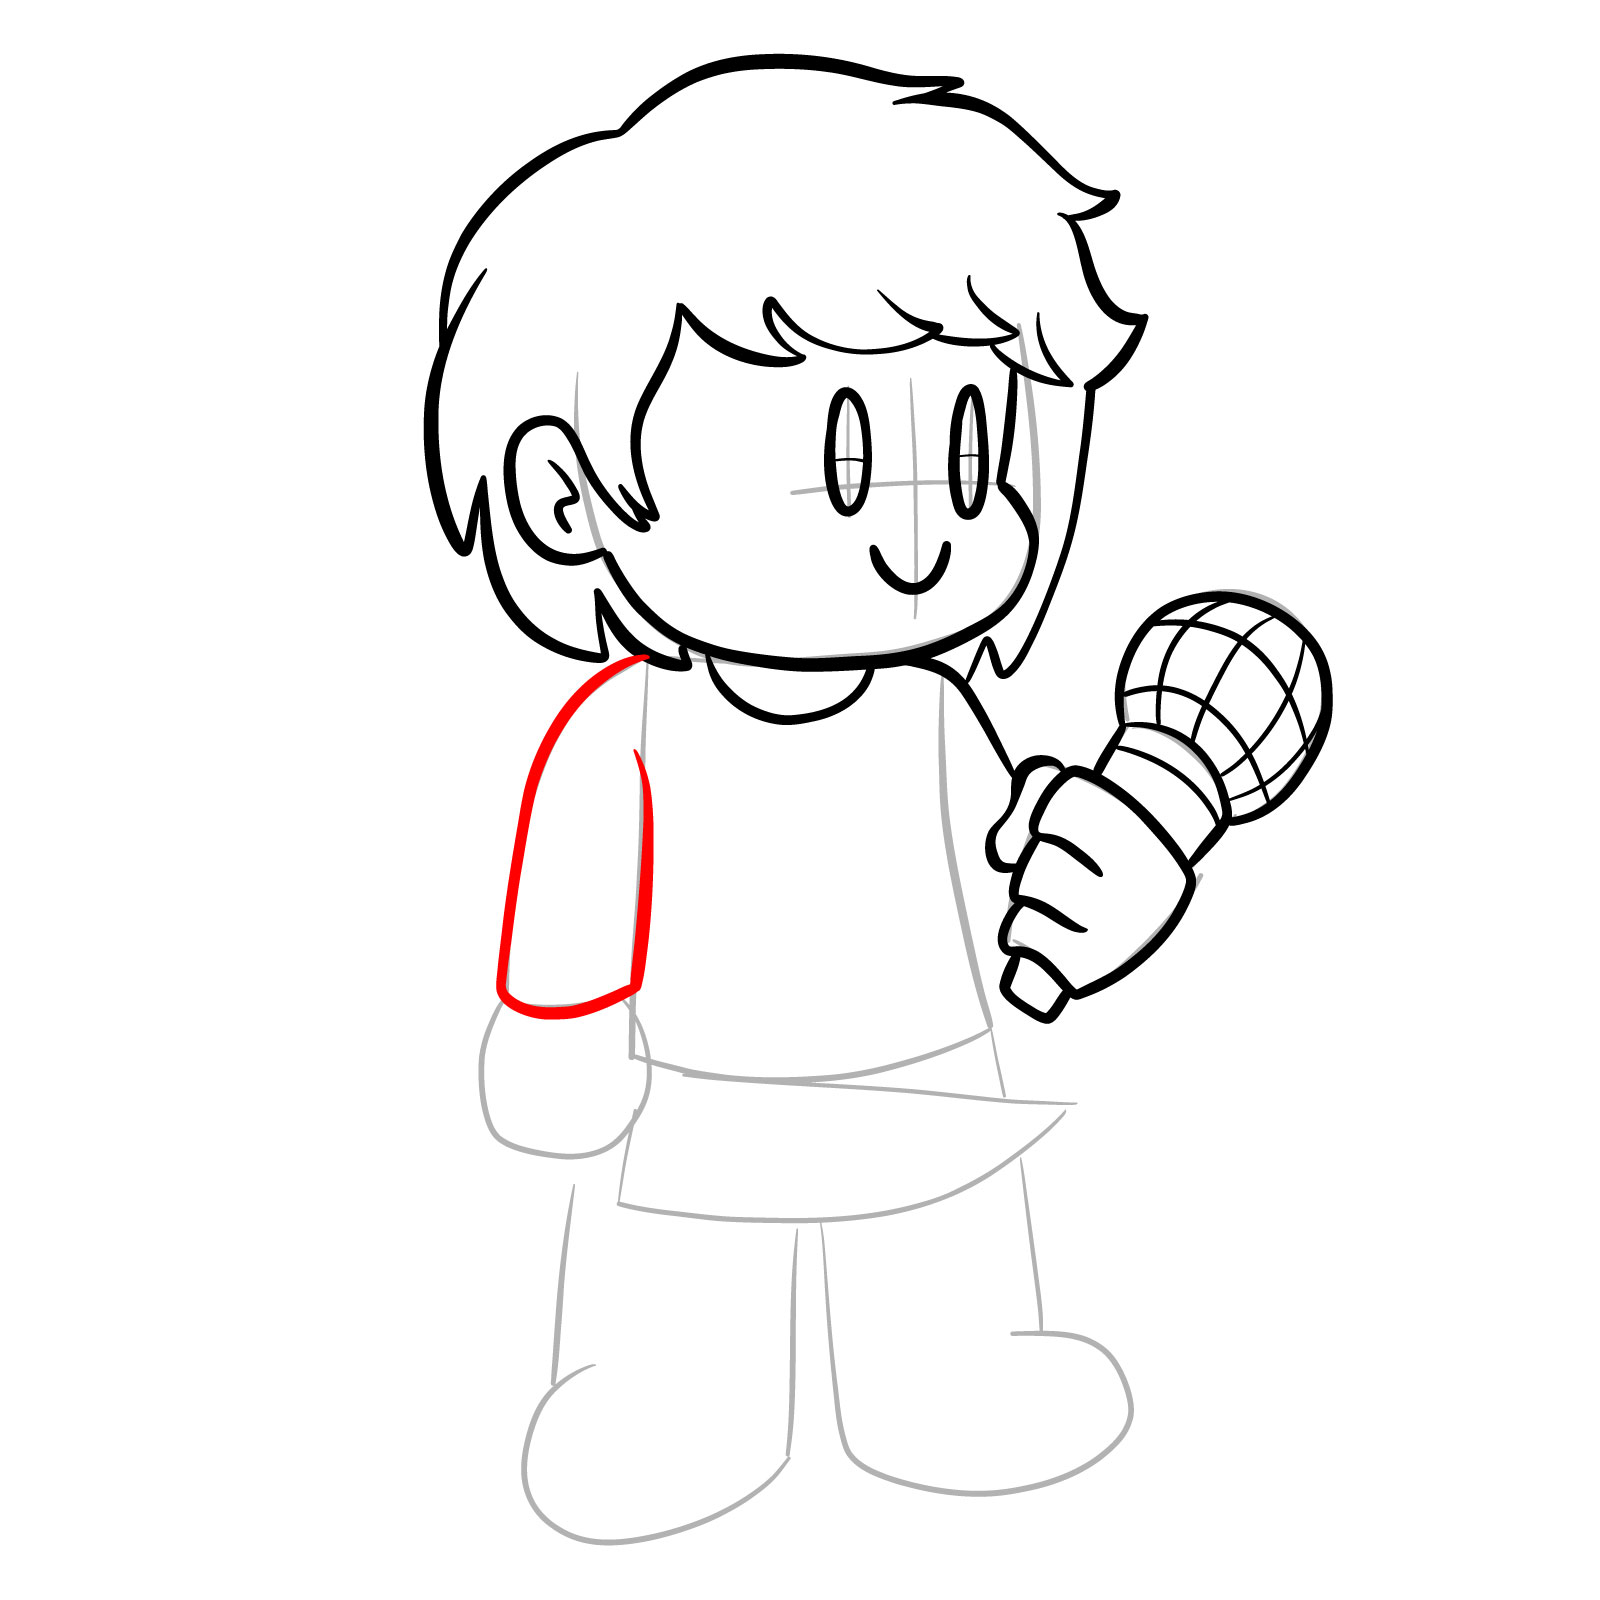 How to draw Chara from FNF - step 19